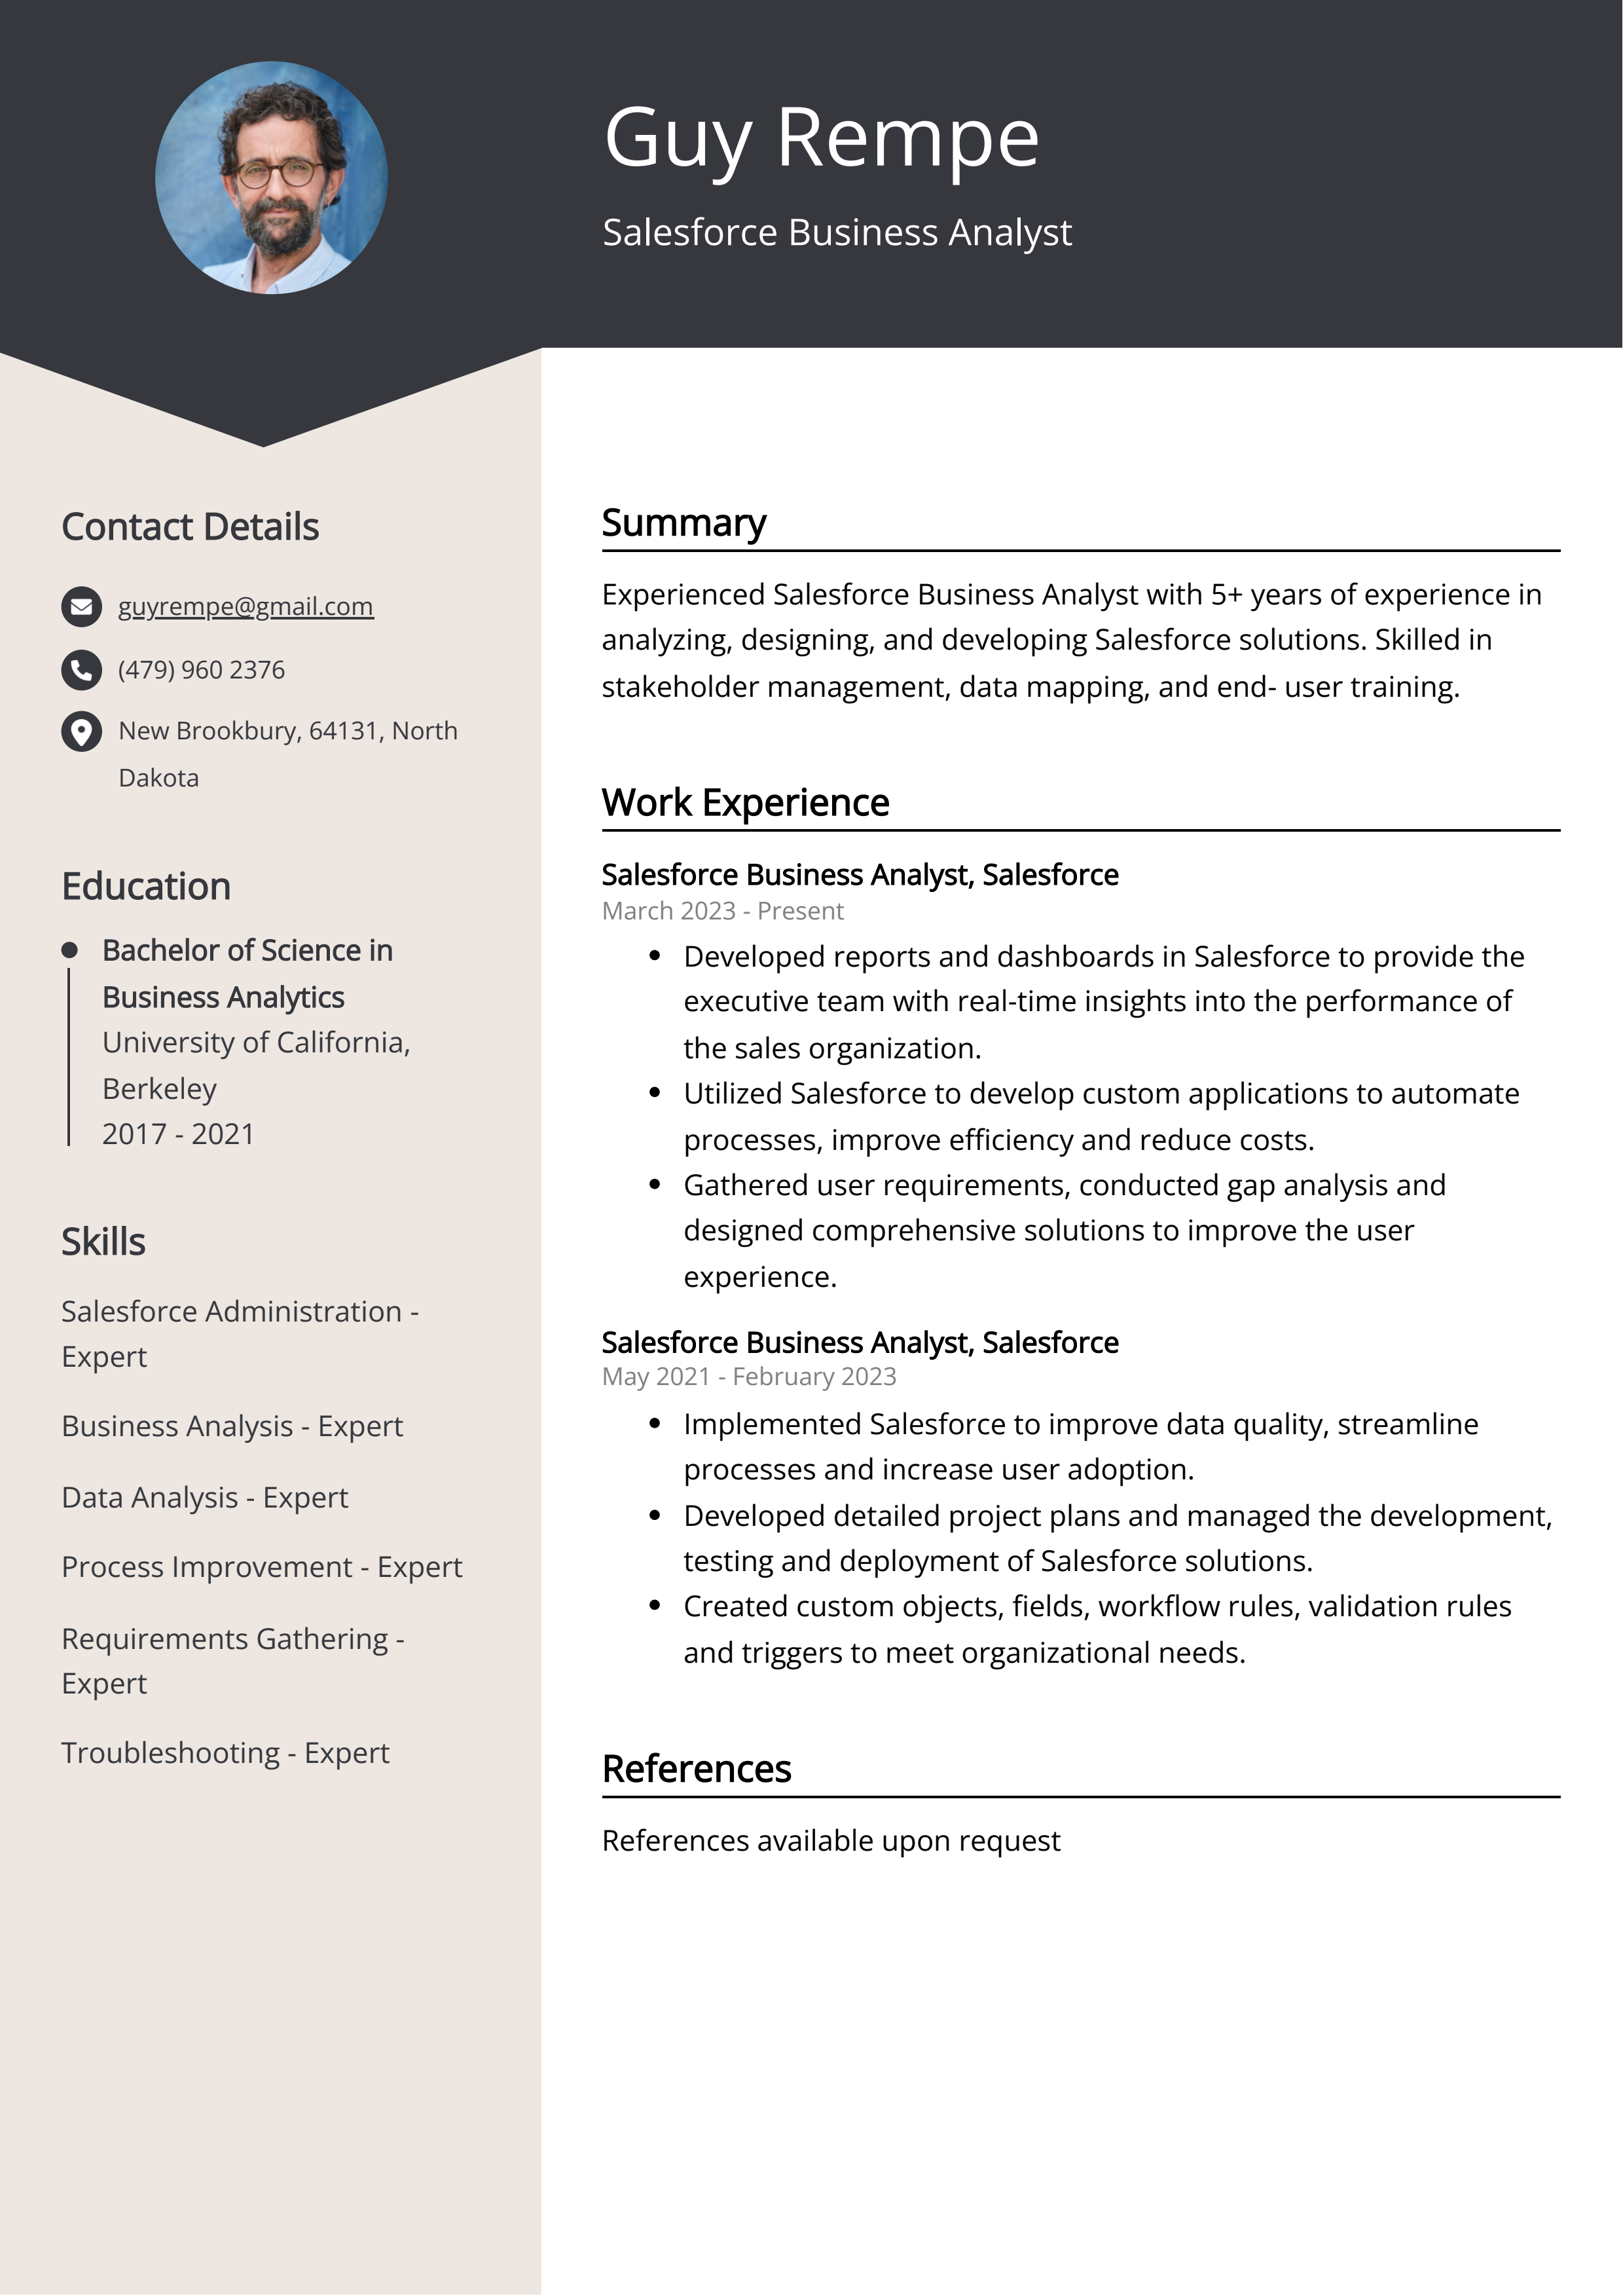 Salesforce Business Analyst Resume Example